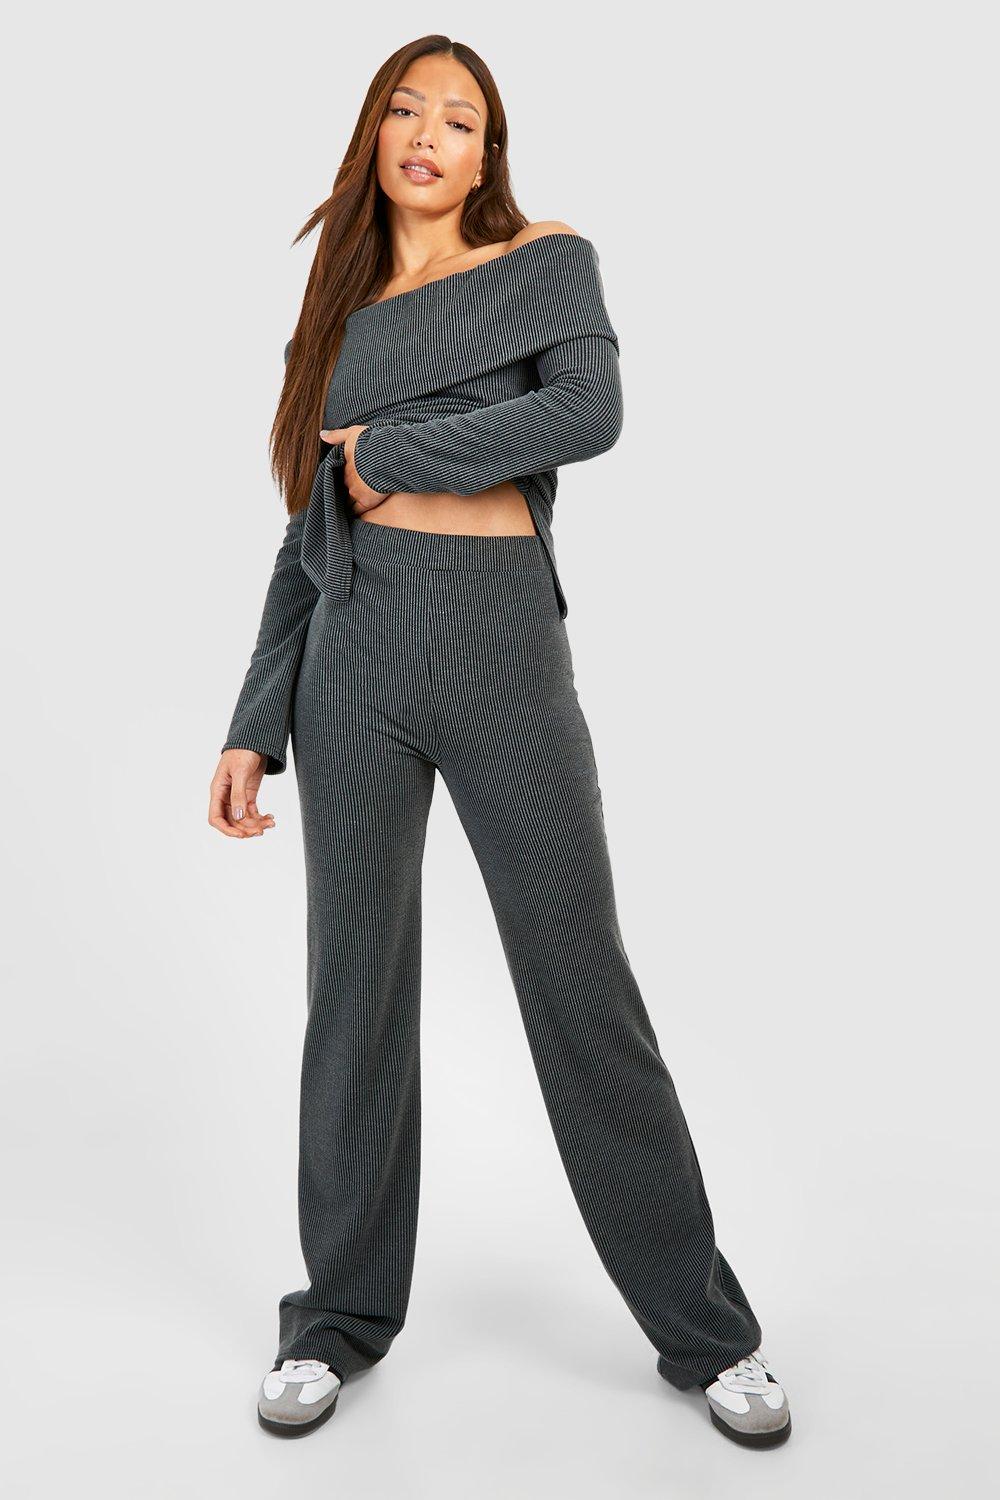 Buy Olive Trousers & Pants for Women by R&B Online | Ajio.com